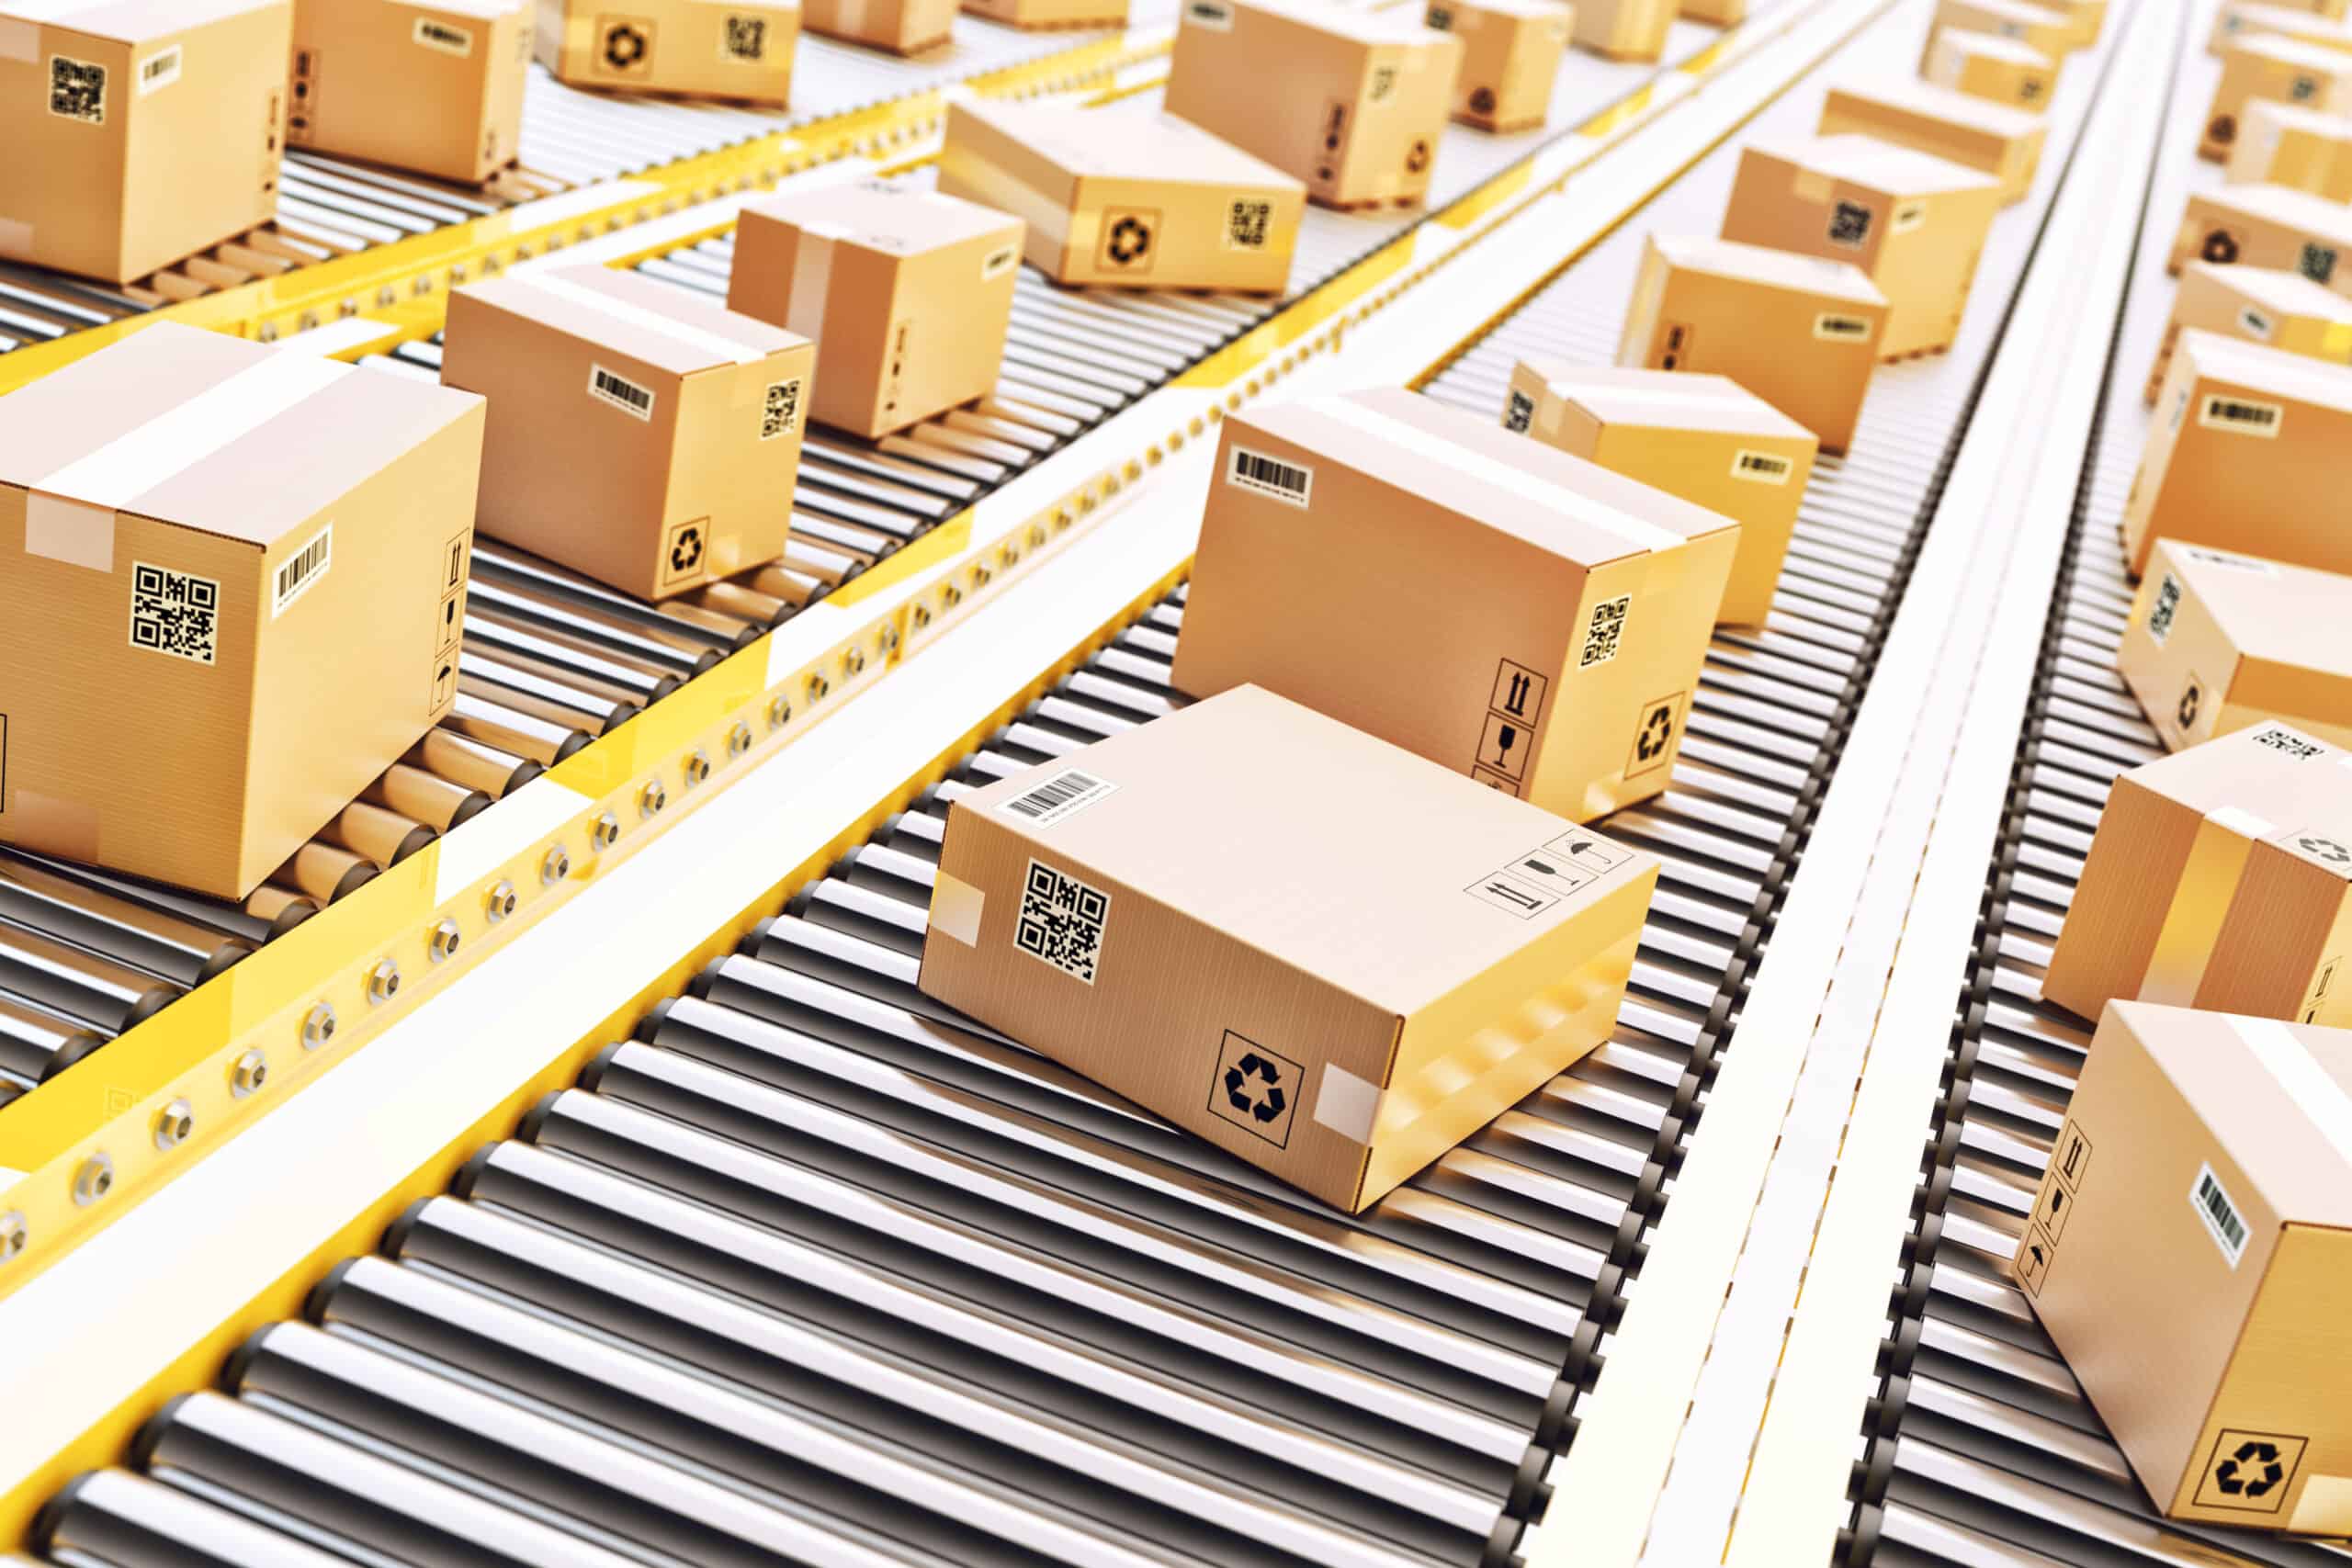 Cardboard boxes on a conveyor line in distribution warehouse